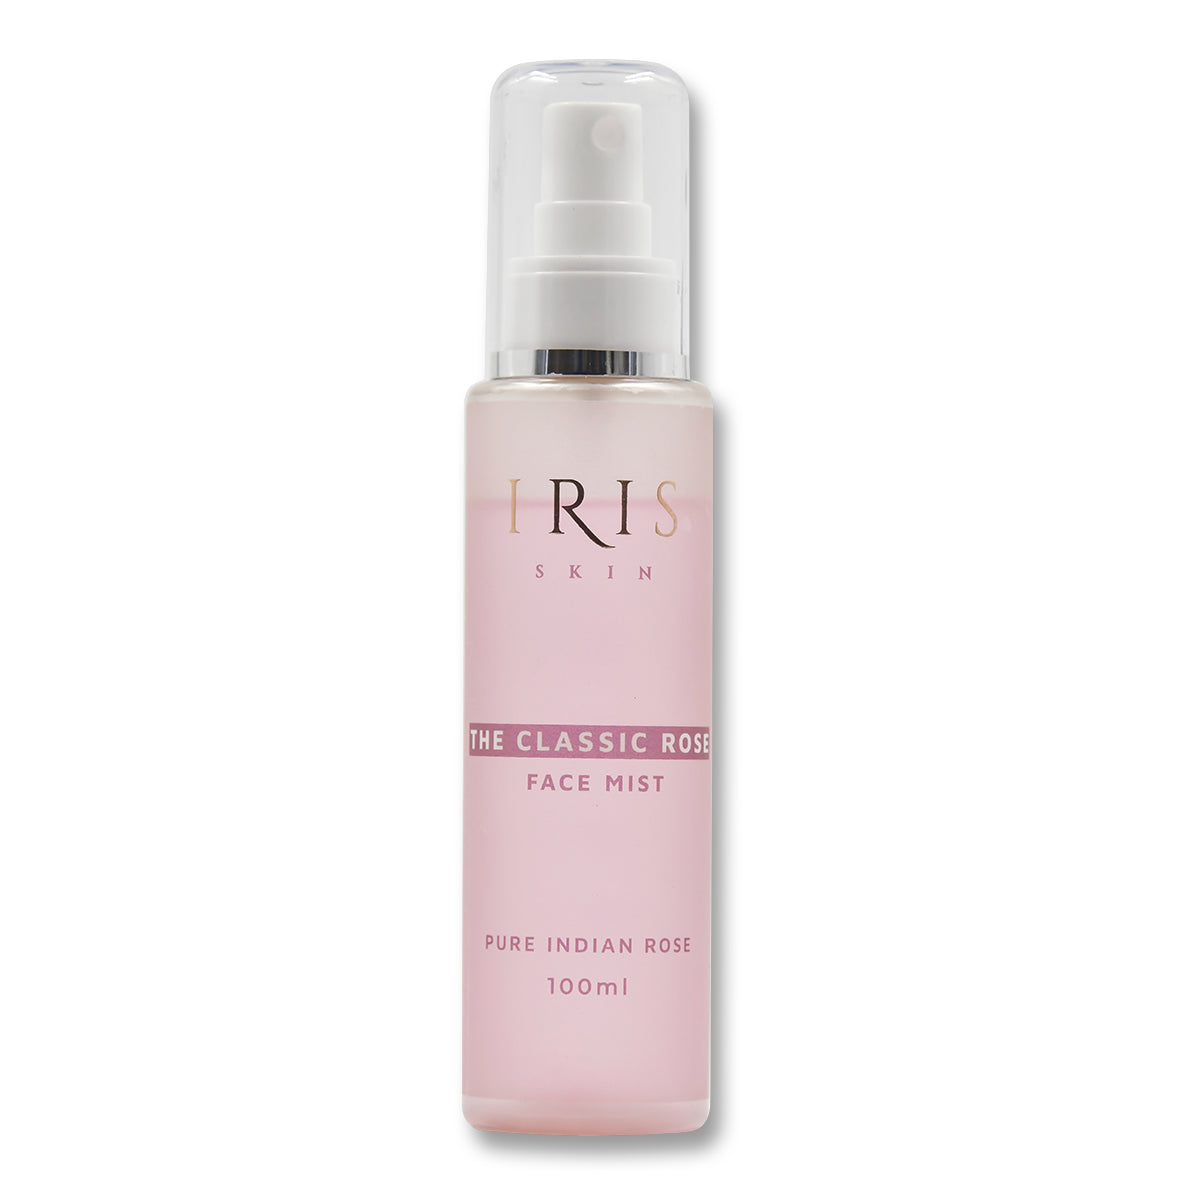 The Classic Rose Face Mist